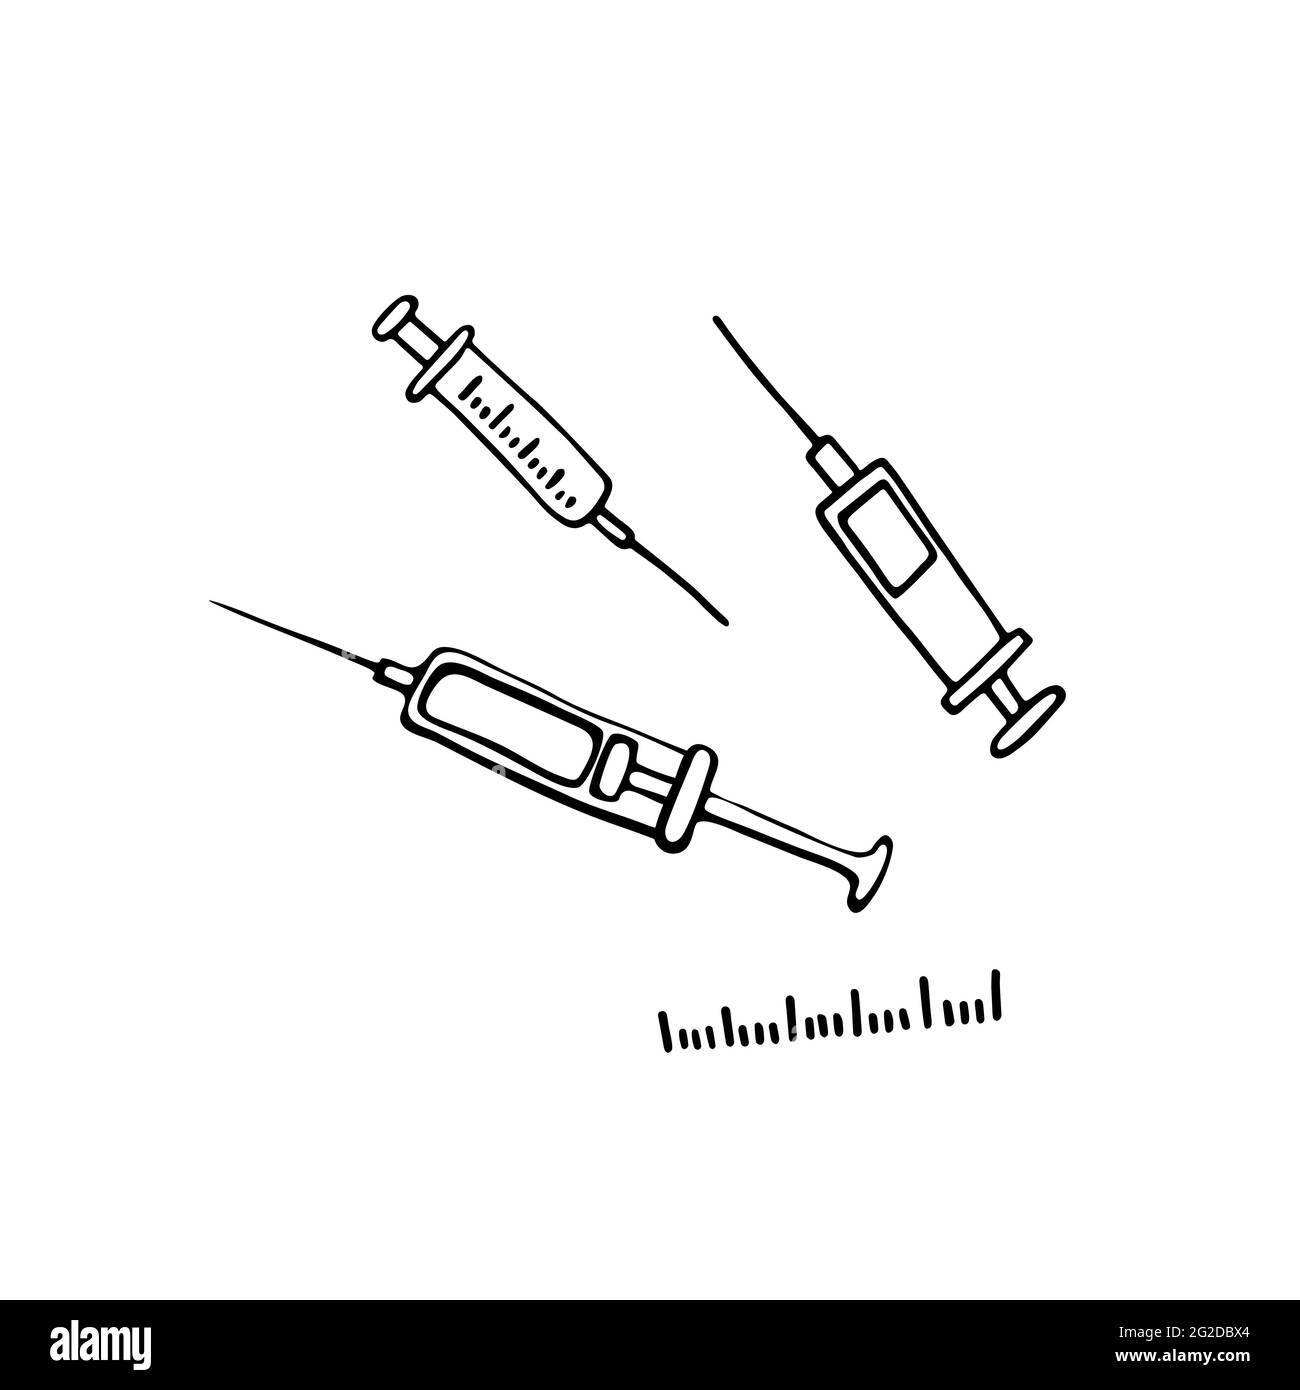 Medical set. Doodle syringes for influenza vaccination, disease, prevention, healthcare, injections, tests. Vector illustration with pharmaceutical ha Stock Vector